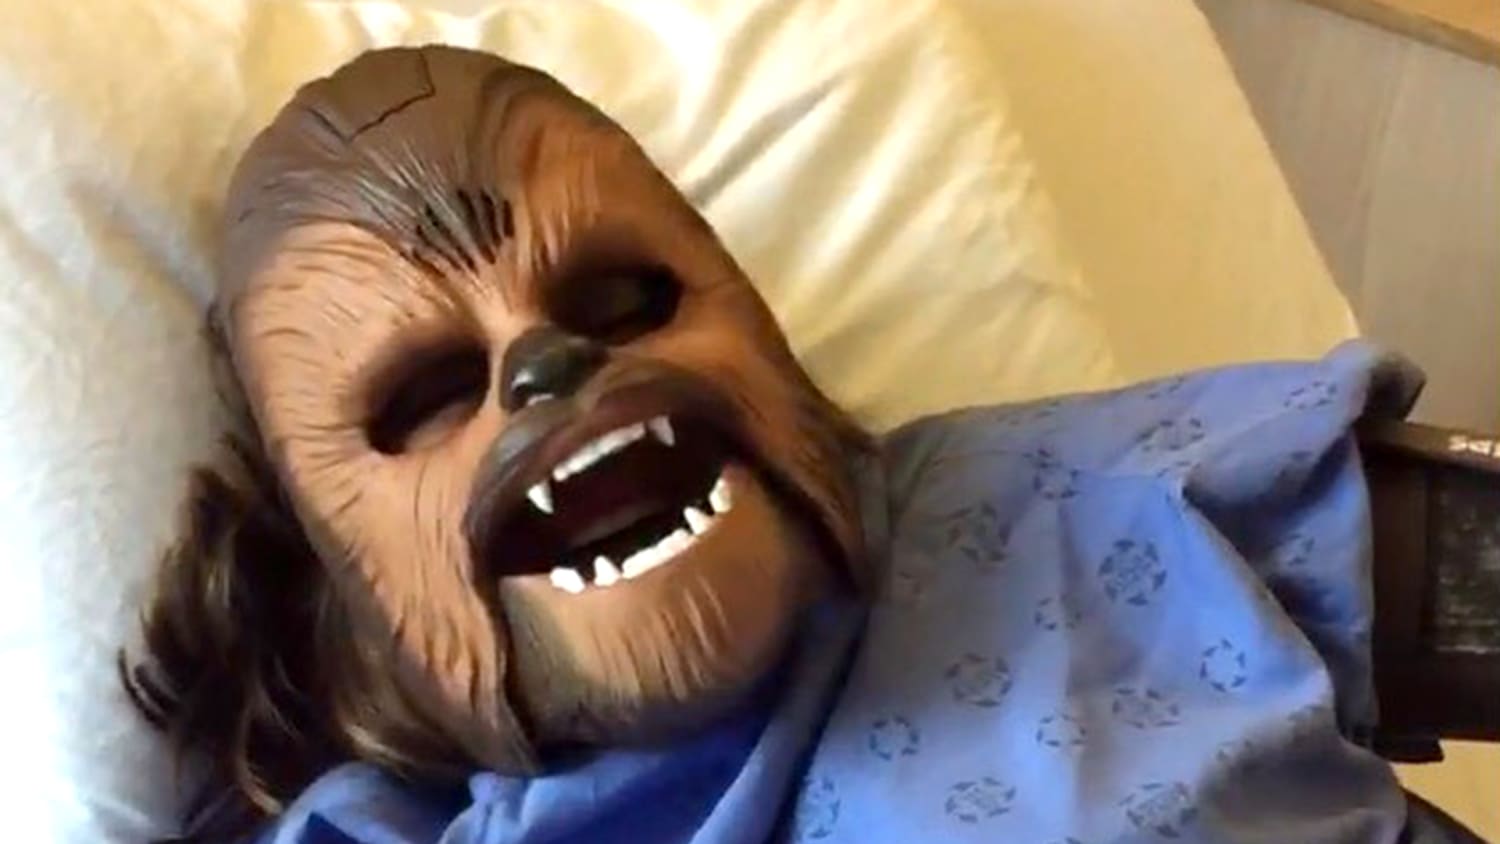 Pregnant woman wears Chewbacca while in labor